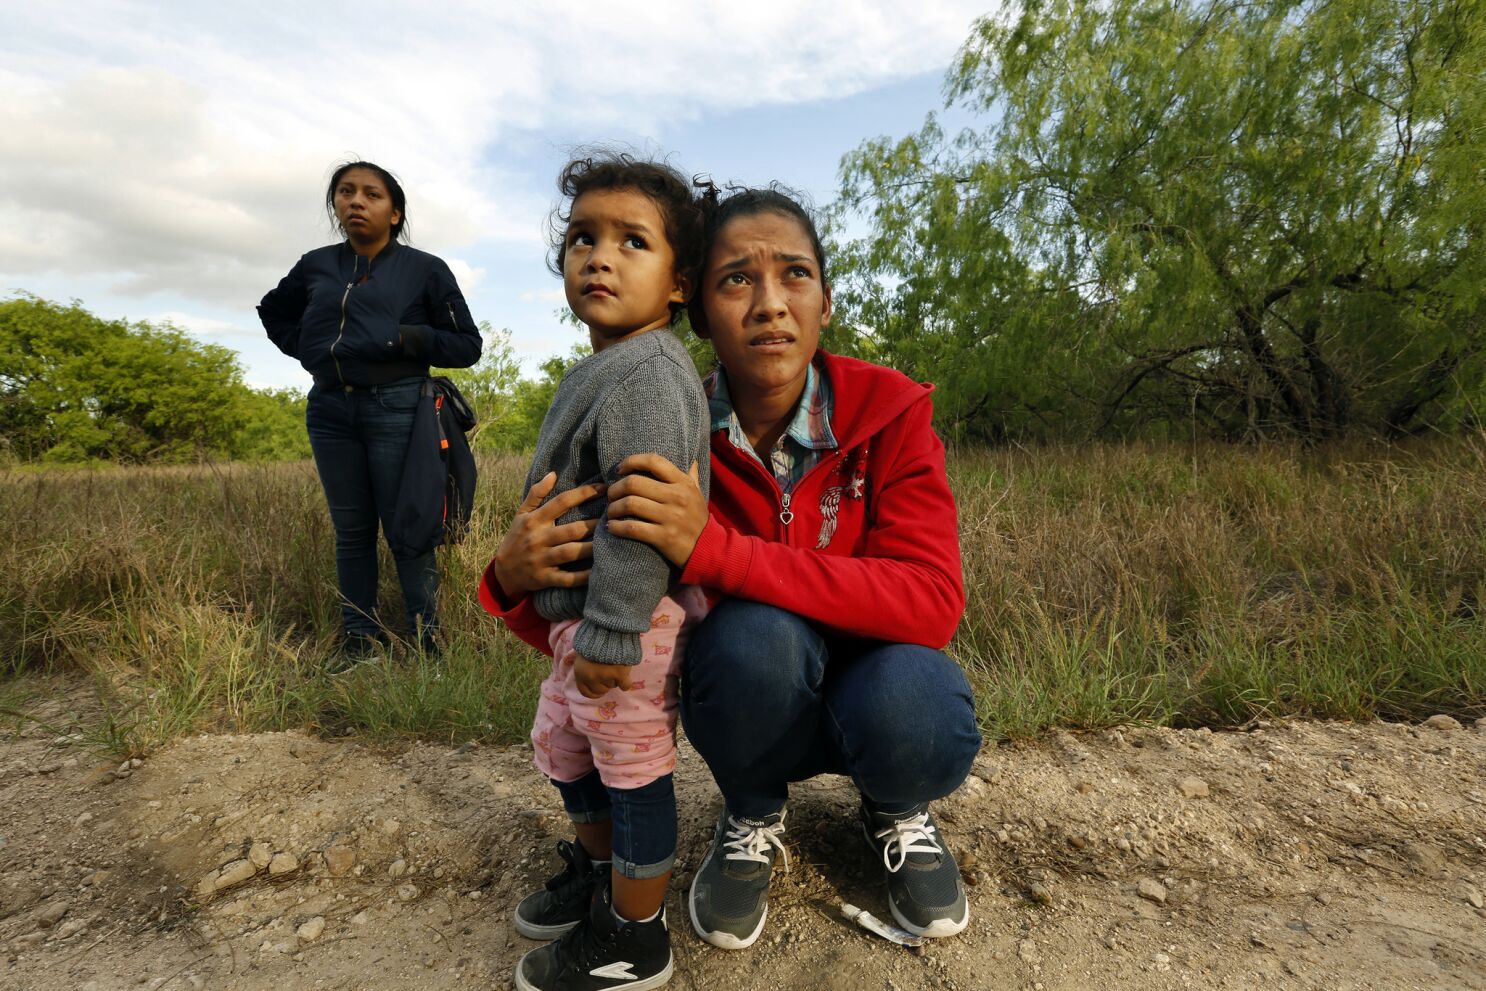 Migrants, young and old, are not always related. Border Patrol says fear of  child trafficking forces separations - Los Angeles Times